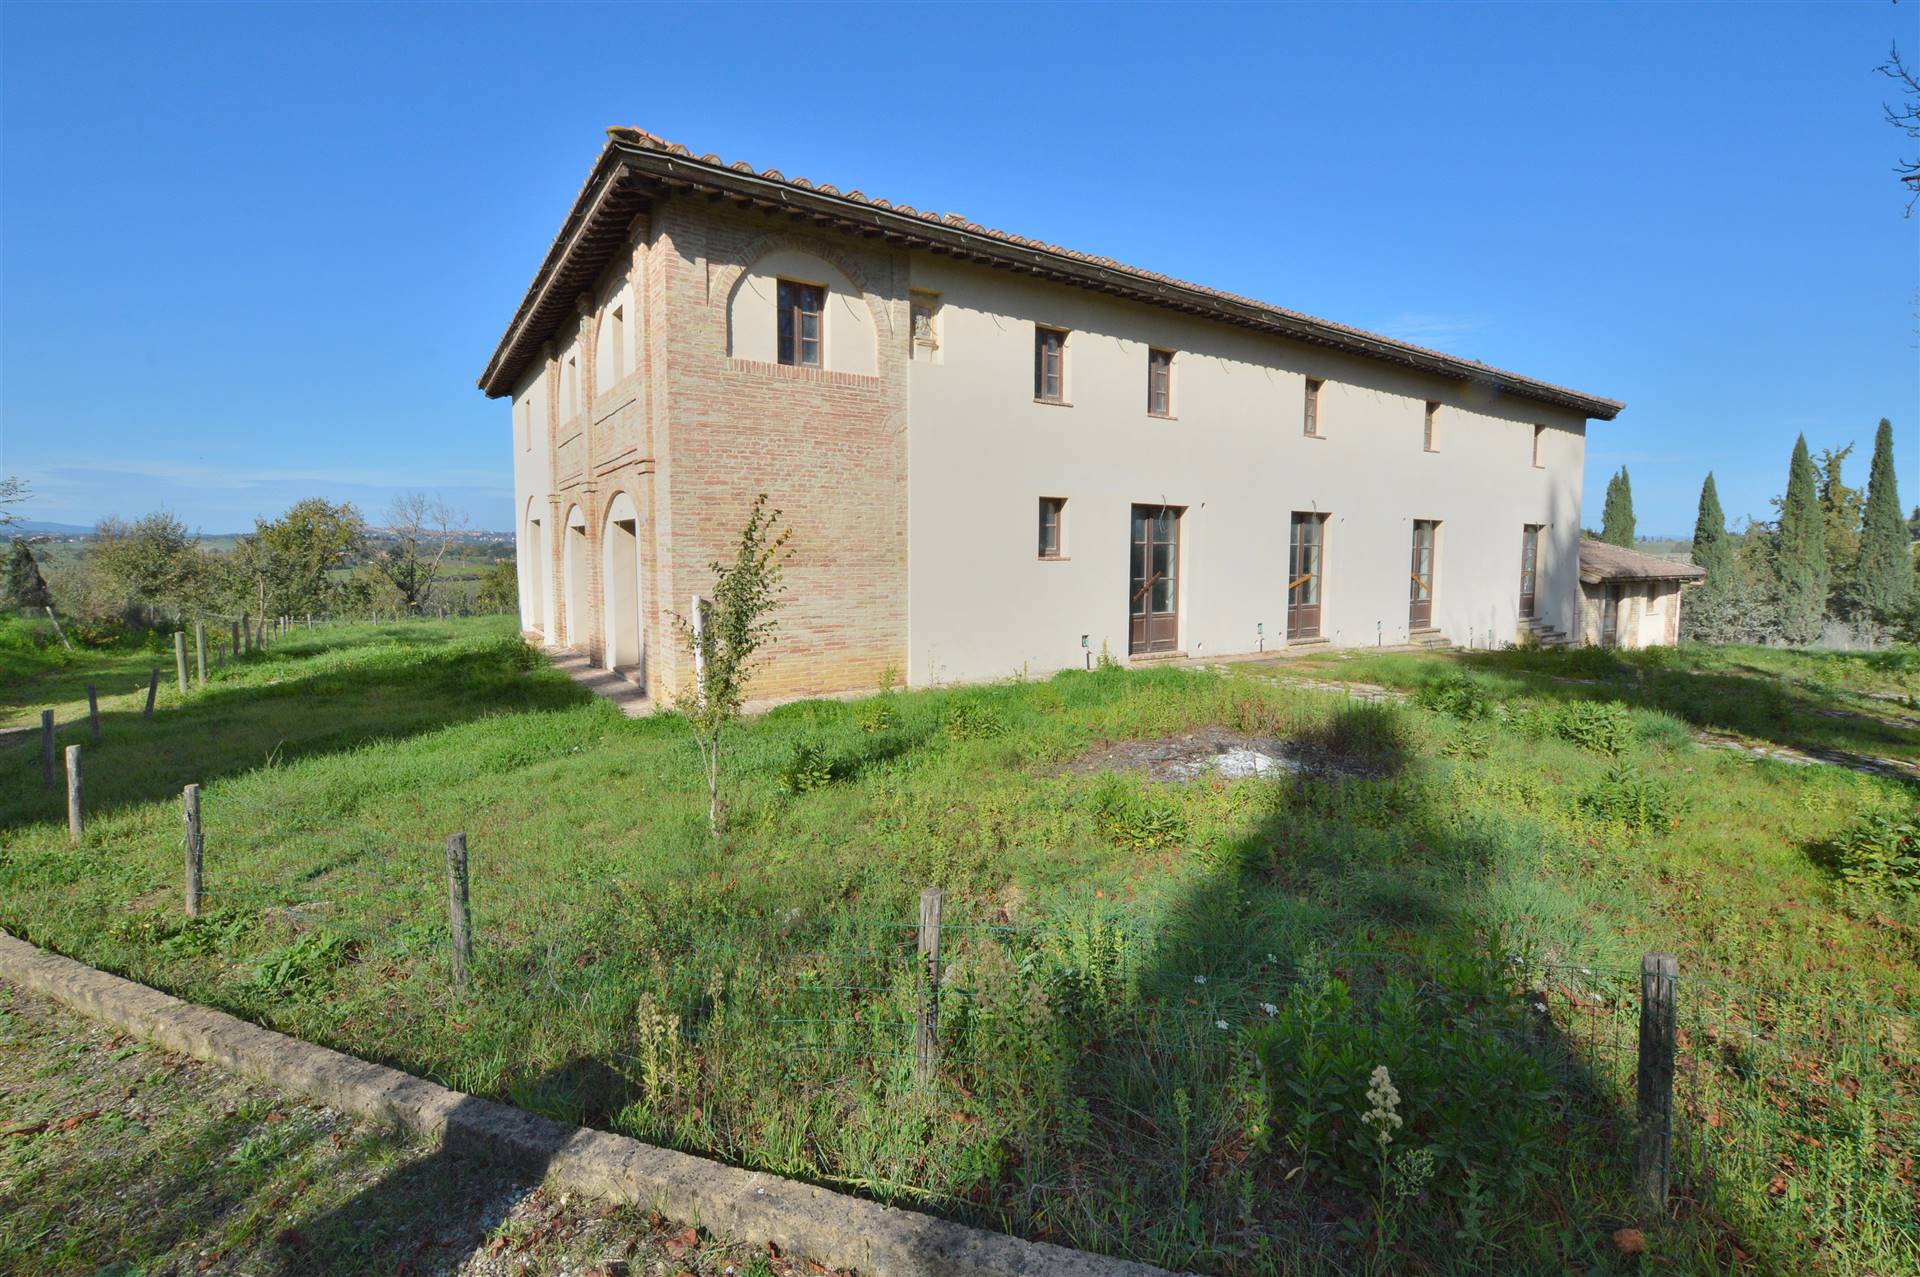 SALTEANO, SIENA, Apartment for sale of 110 Sq. mt., Restored, Heating Individual heating system, Energetic class: C, Epi: 60 kwh/m2 year, placed at Ground on 2, composed by: 5 Rooms, Separate kitchen,